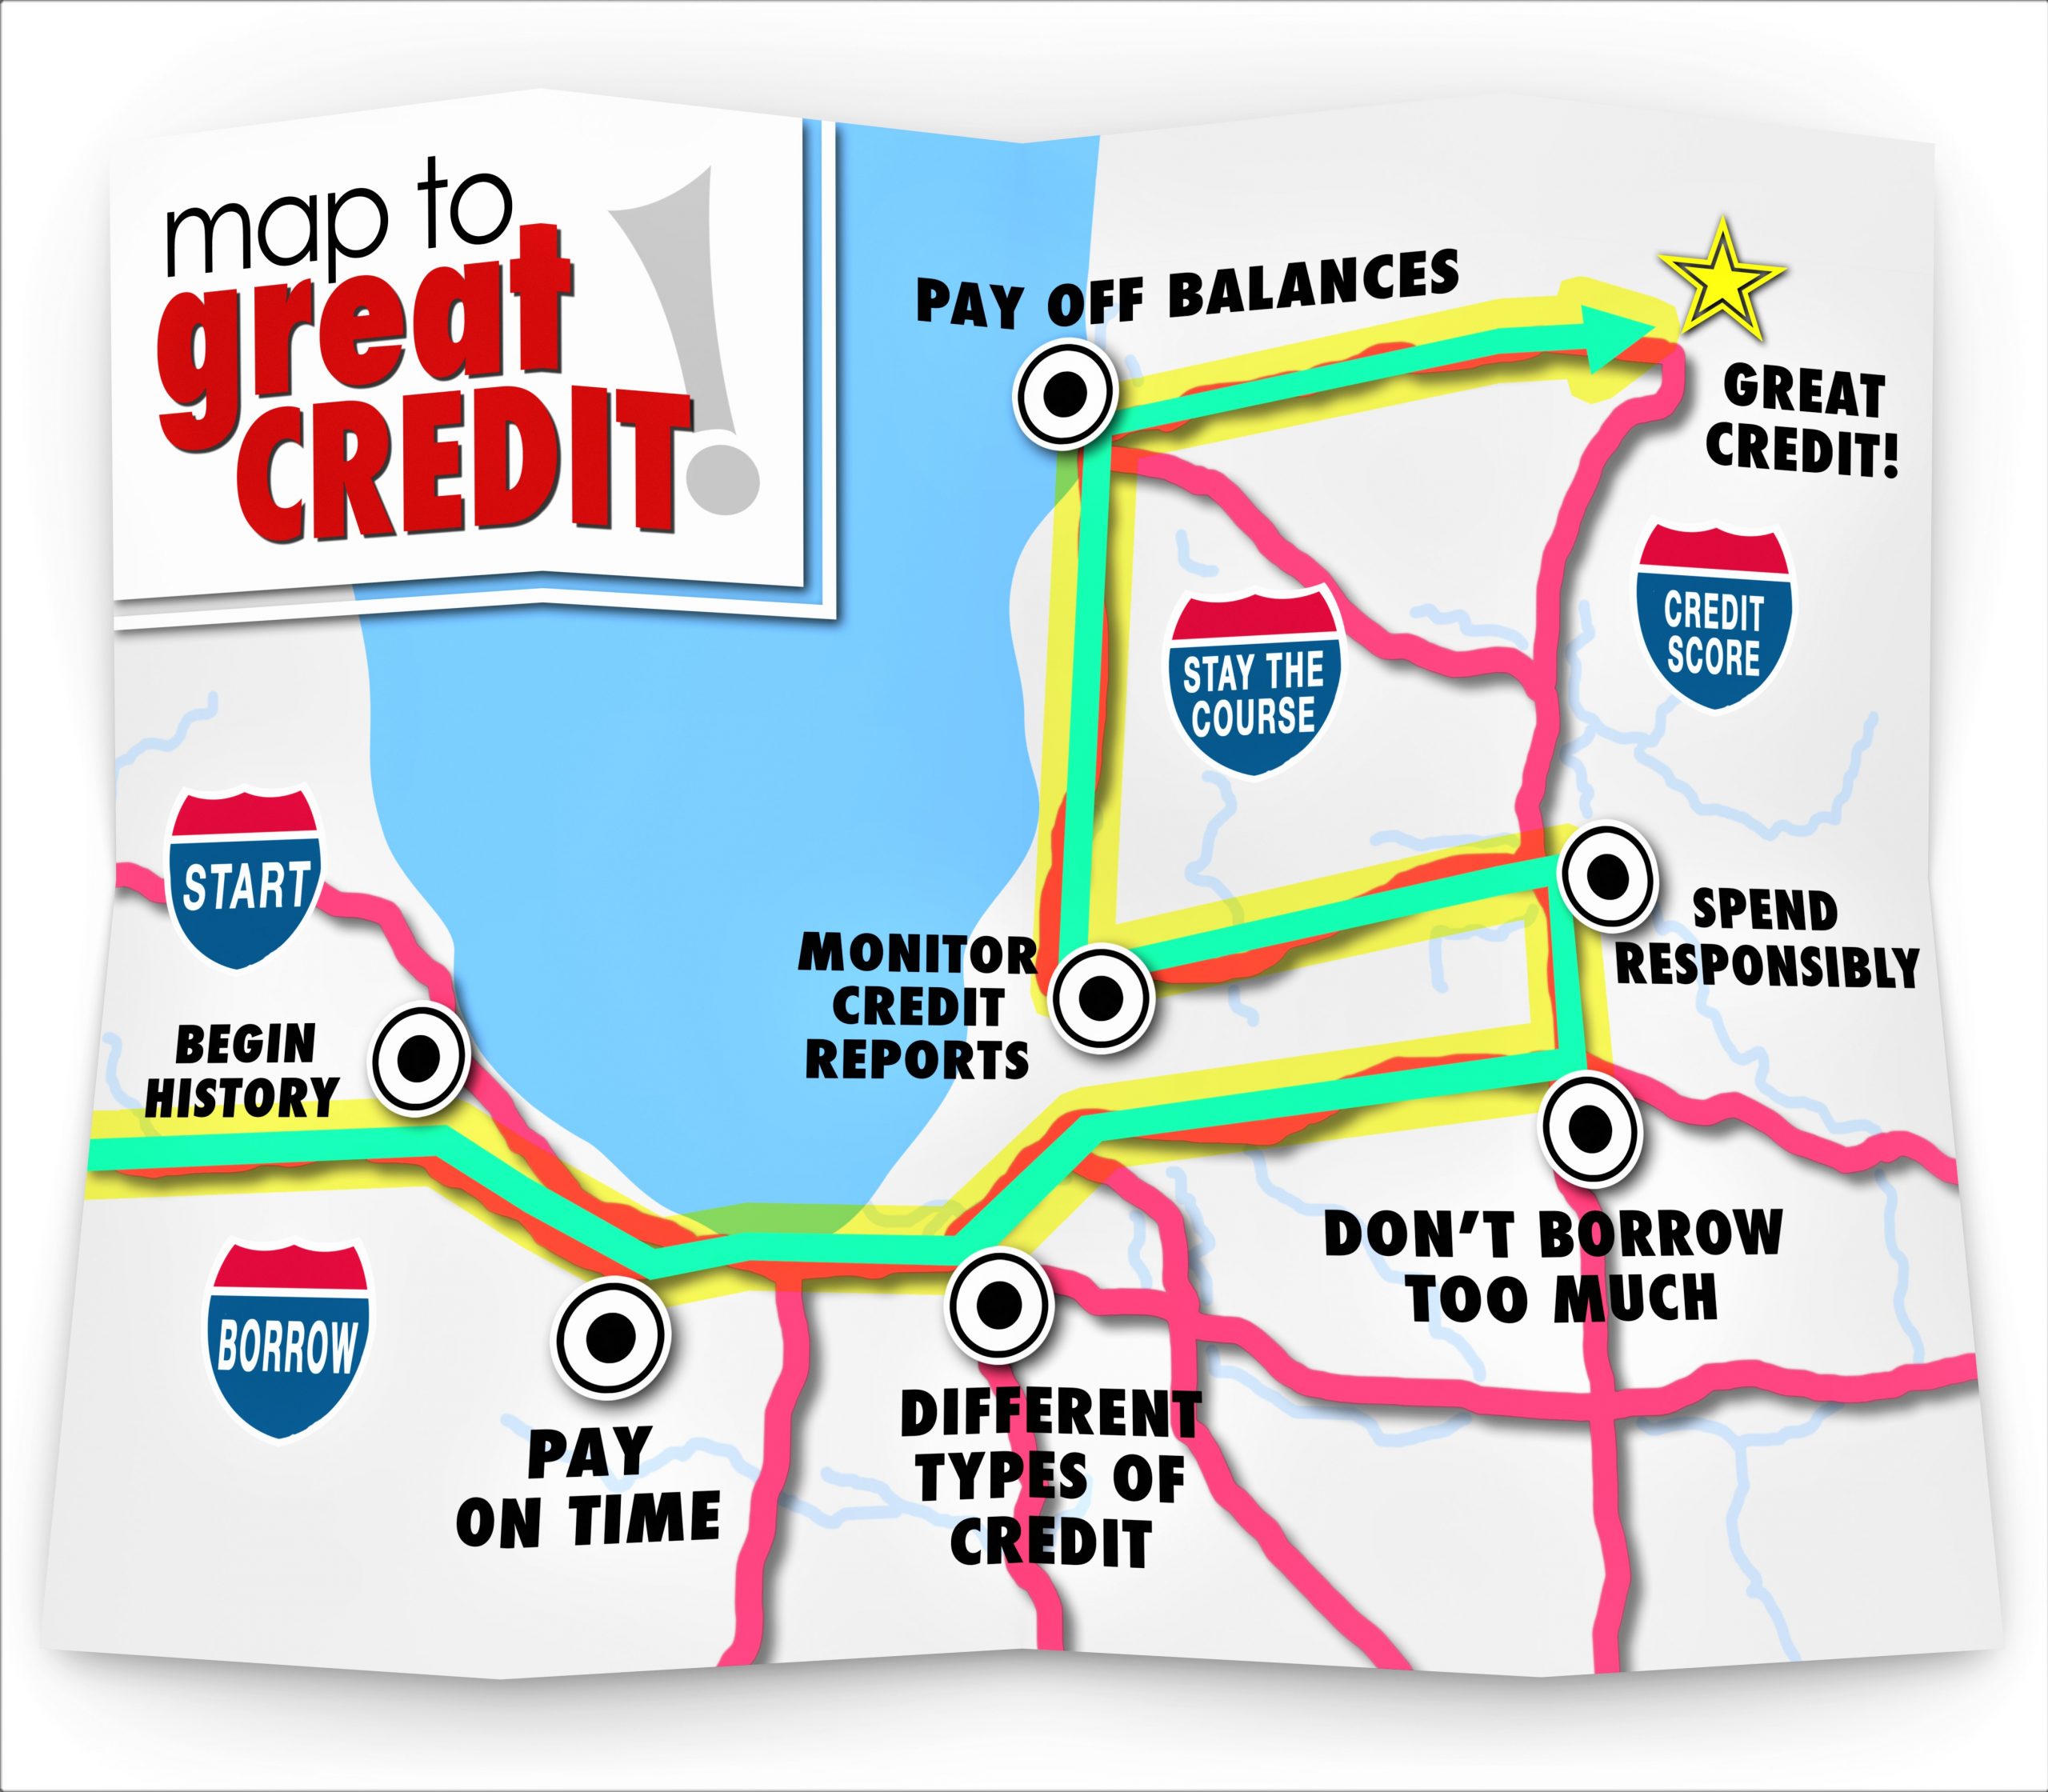 map to great credit